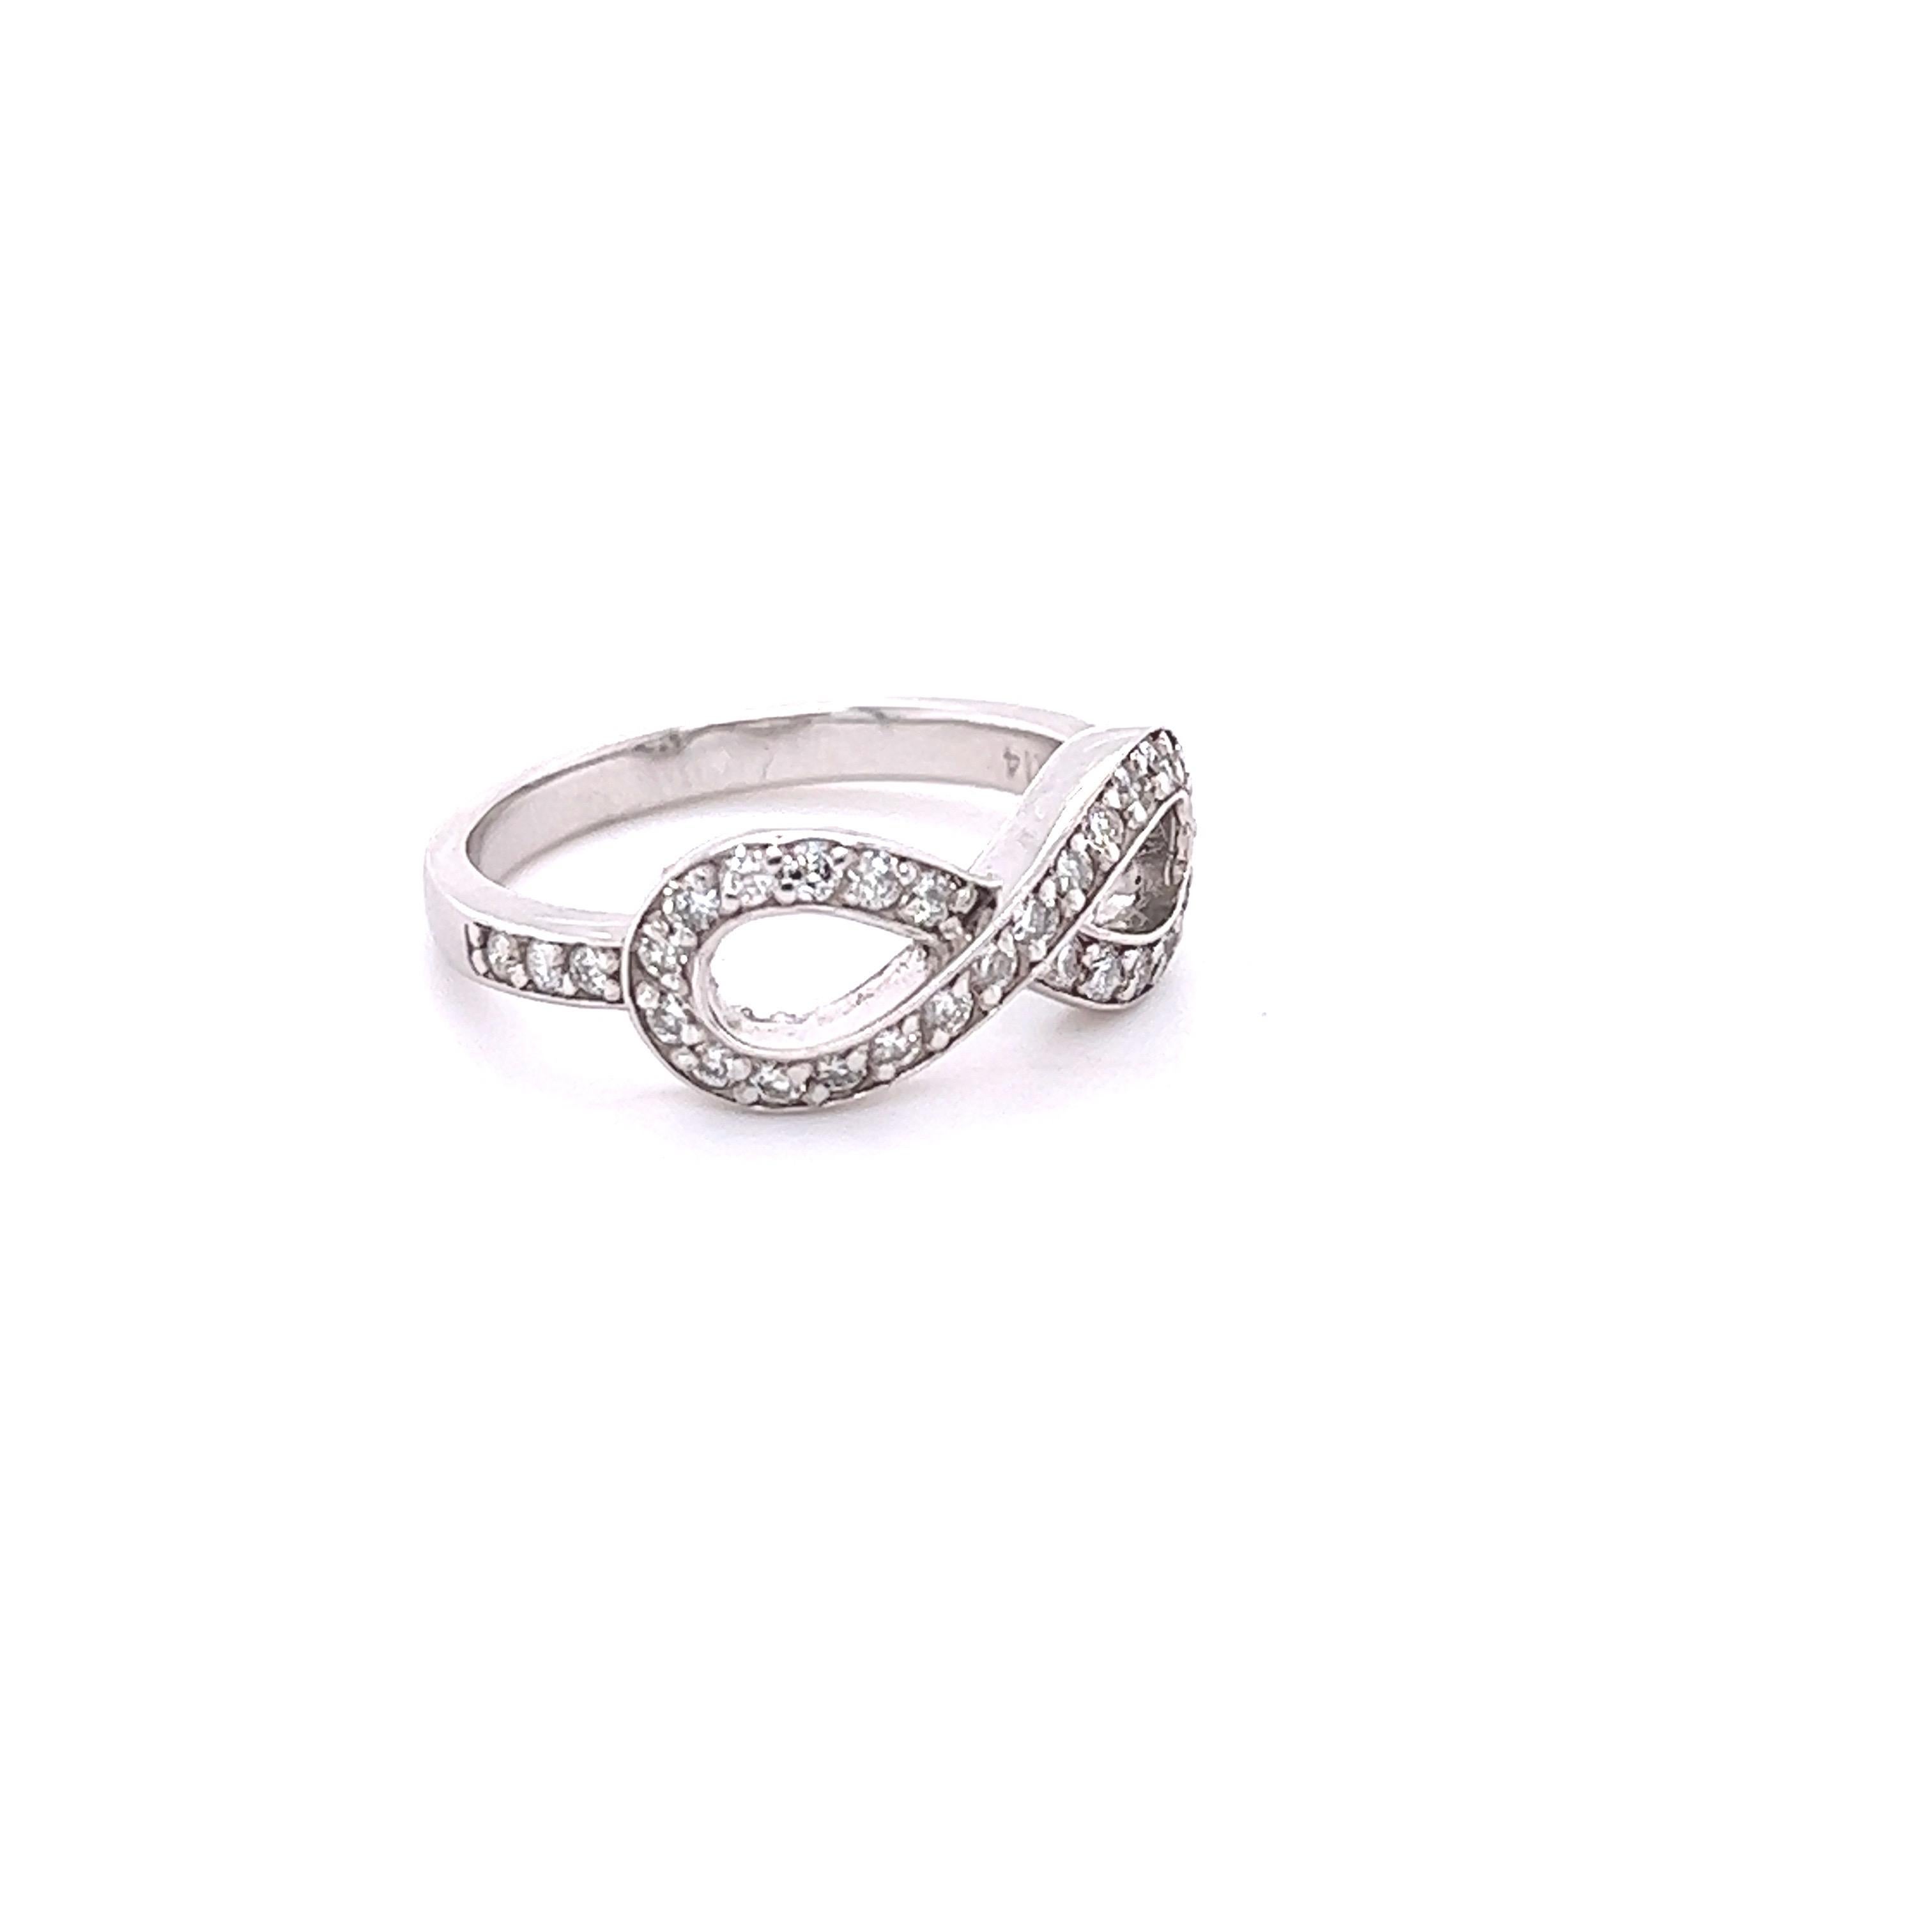 This ring has 32 Round Cut Diamonds that weigh 0.46 carats. The clarity and color of the diamonds are SI2-F. 

The ring is designed in 14 Karat White Gold and weighs approximately 3.5 grams

The ring is a size 6.5 and can be re-sized free of charge.